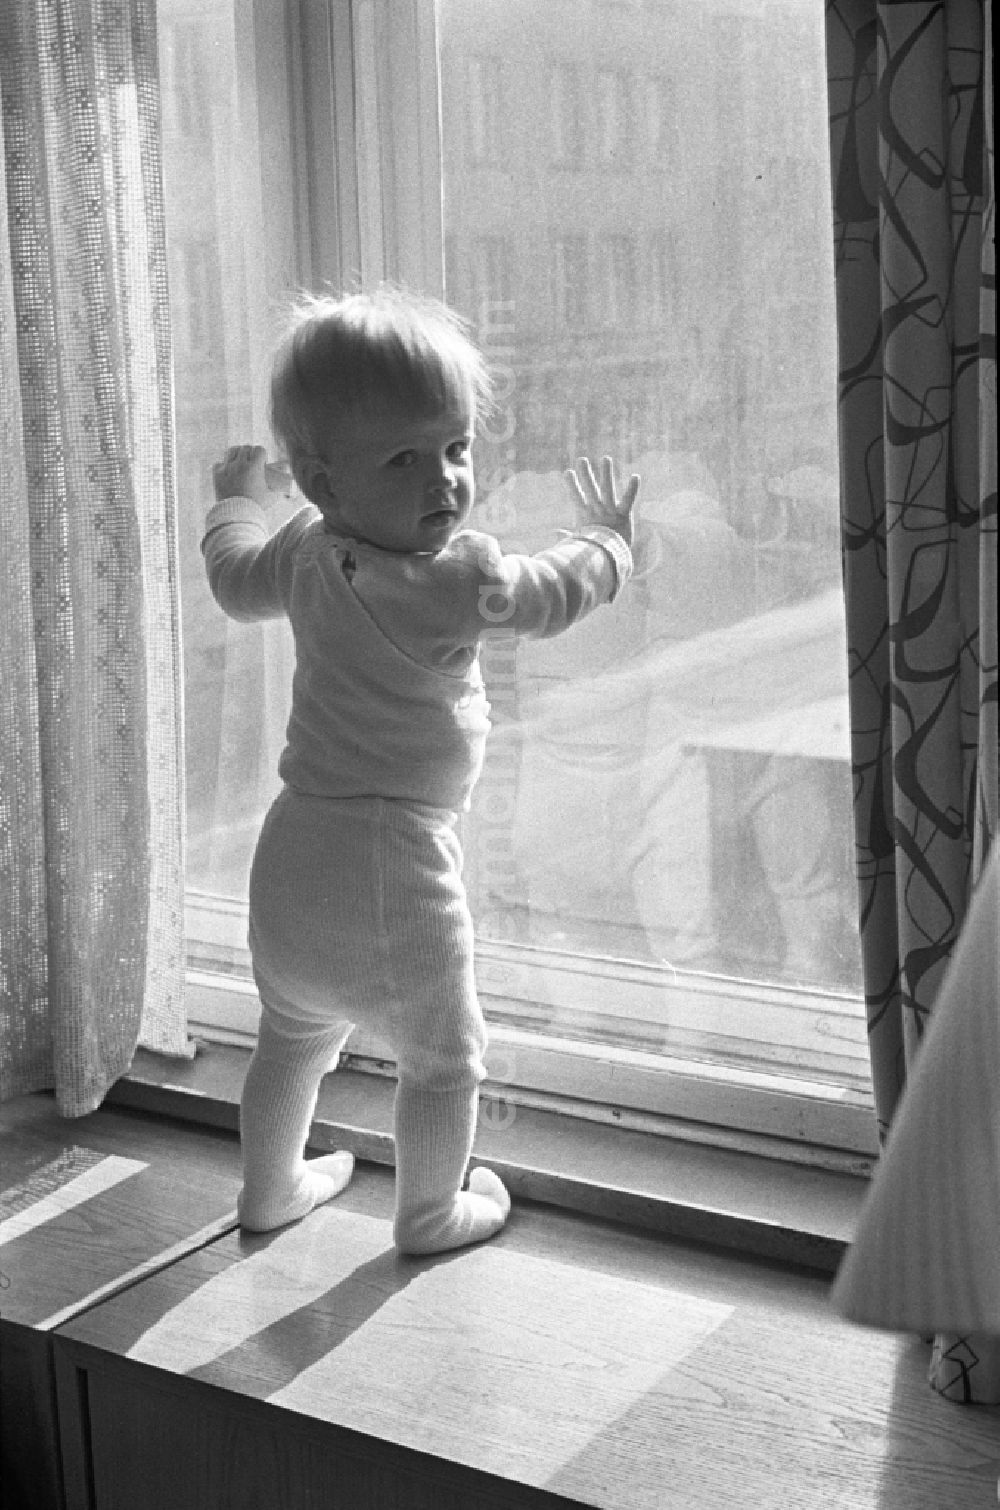 GDR image archive: Berlin - Friedrichshain - A small child with tights standing on the window sill at the window in Berlin